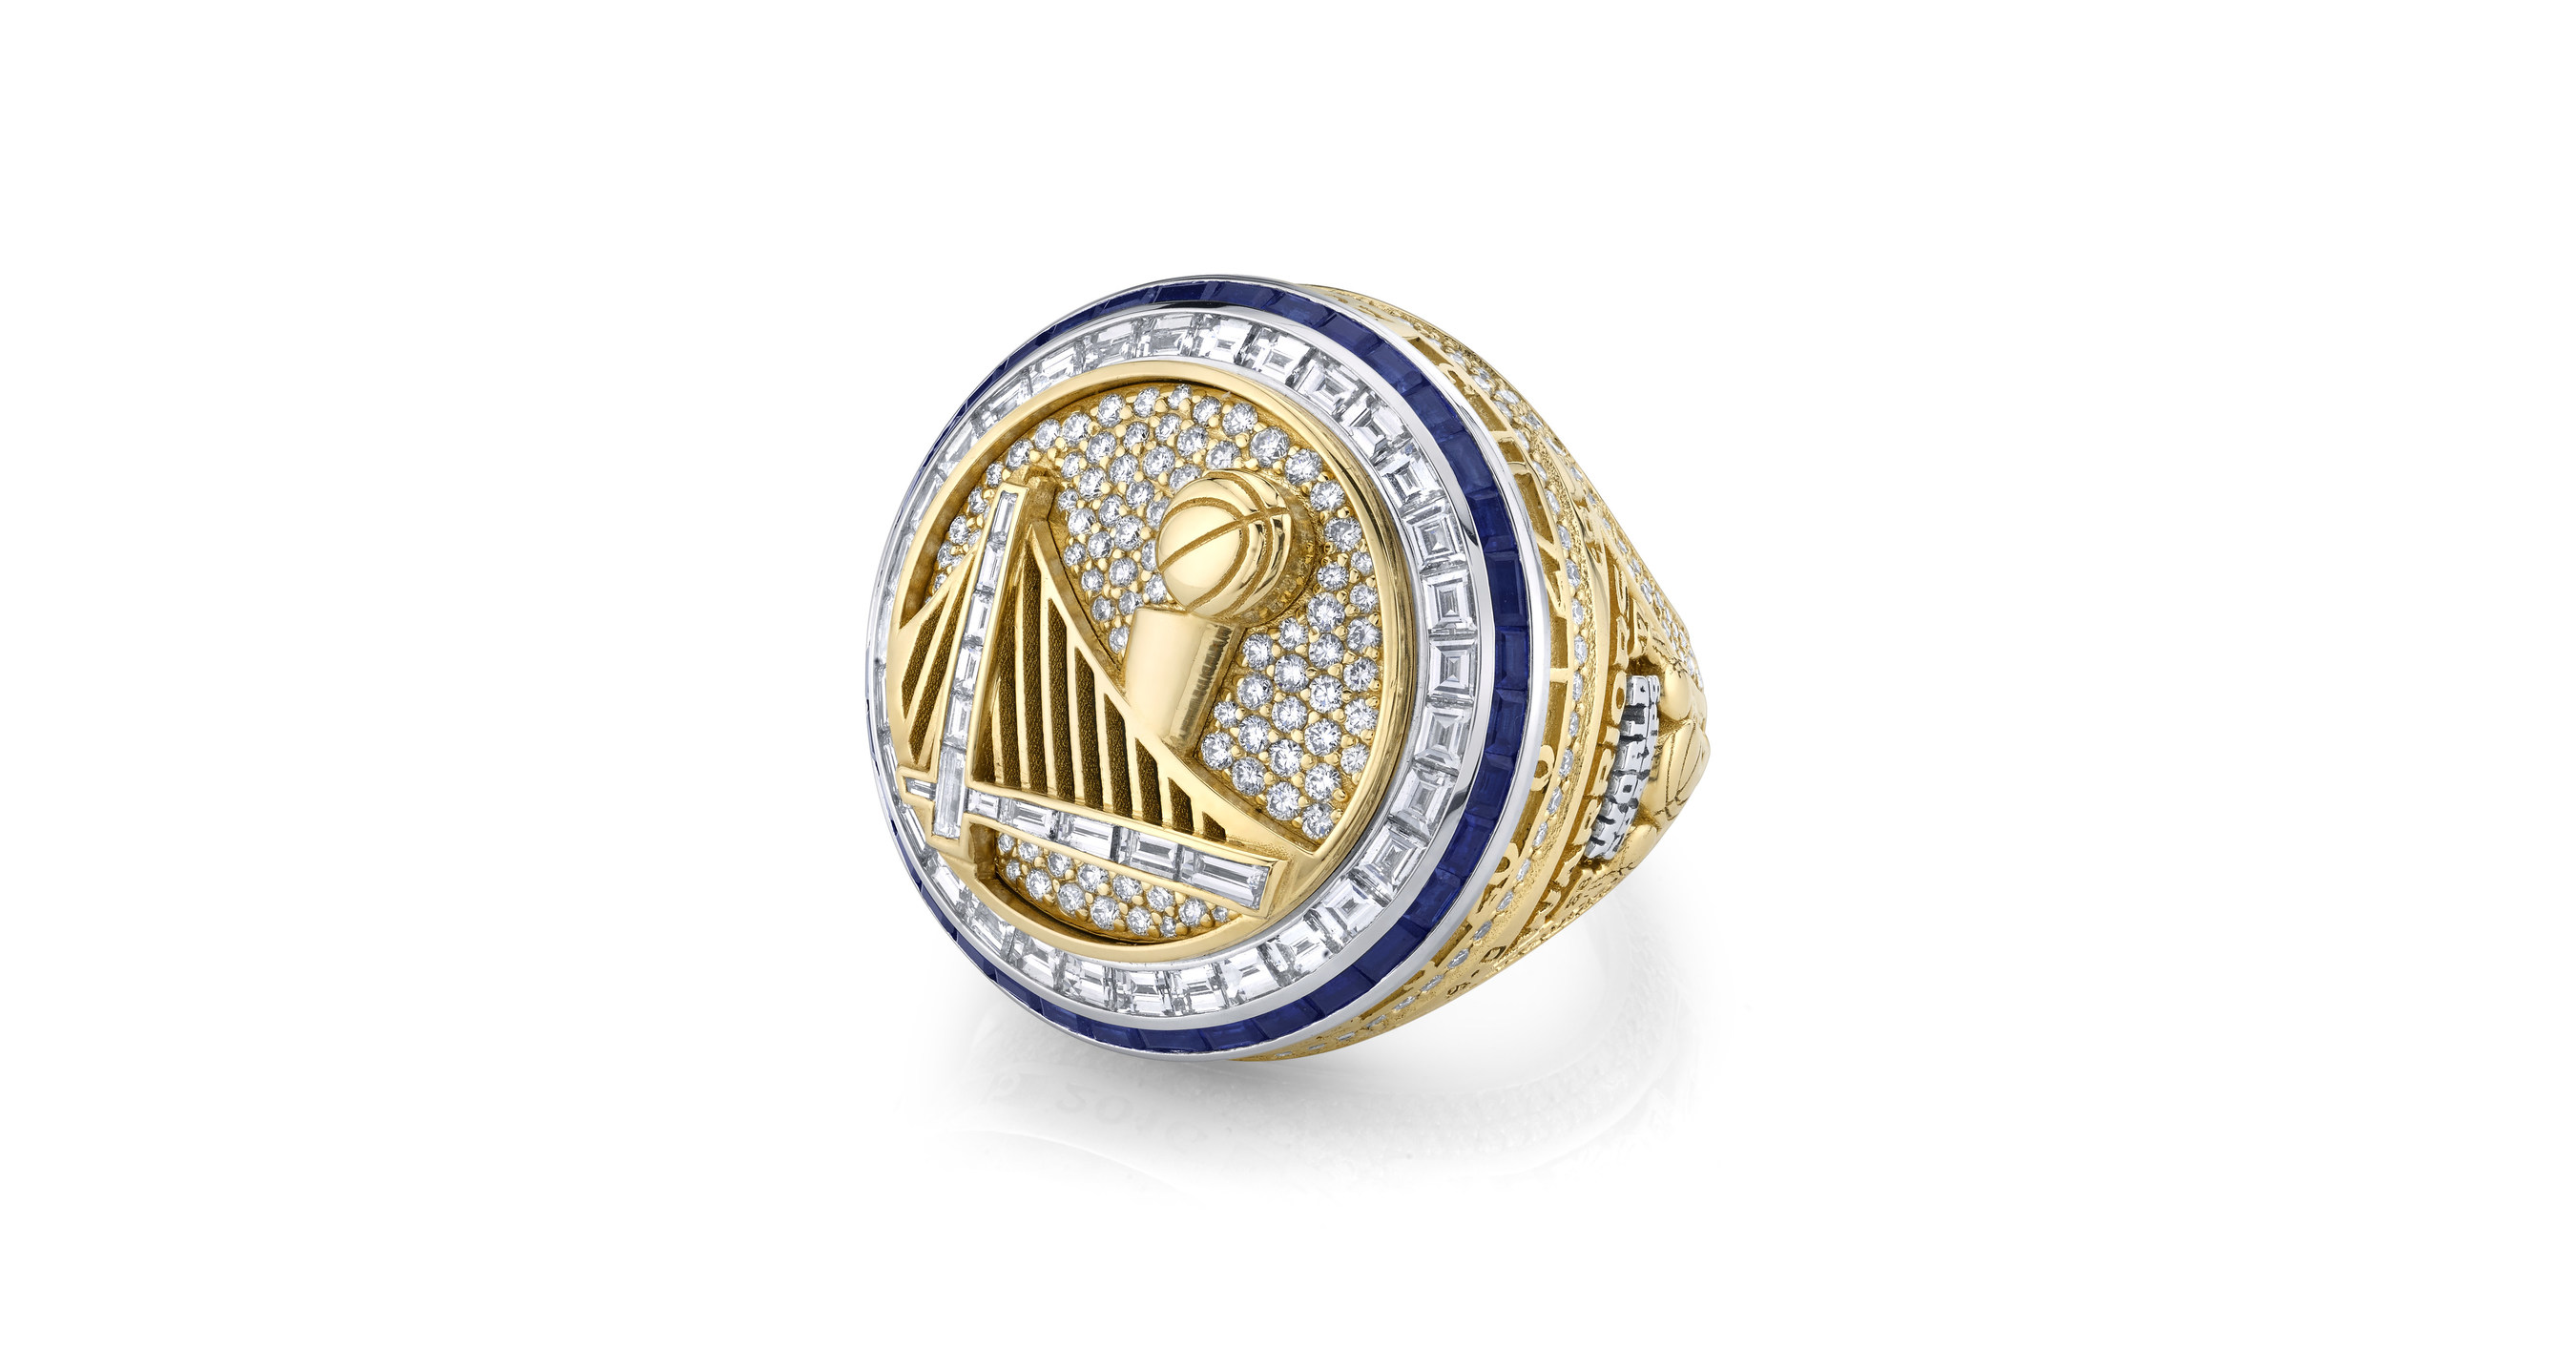 DubNation the Championship Ring Sweepstakes, presented by @chase